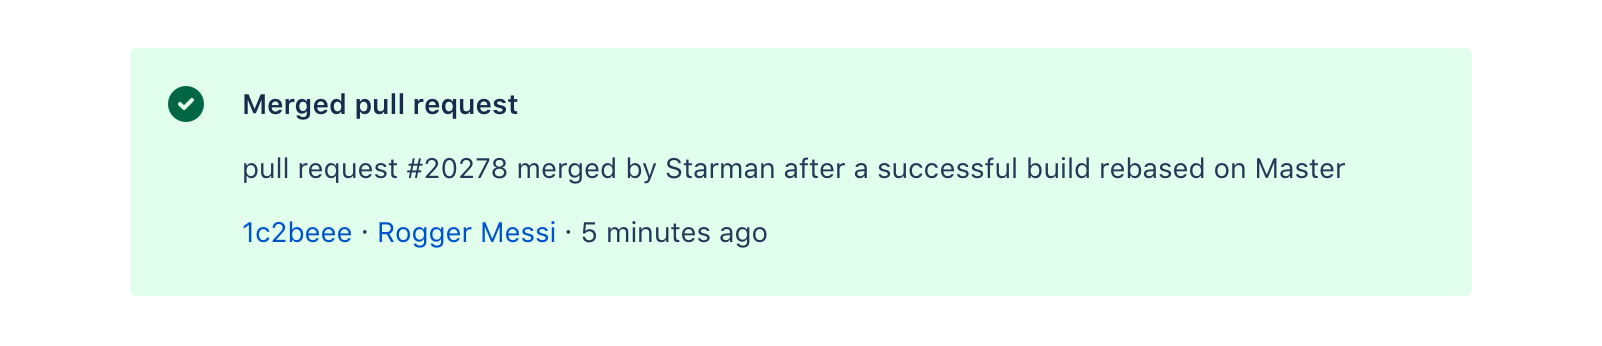 A section message example showing confirmation of a successfully merged pull request.